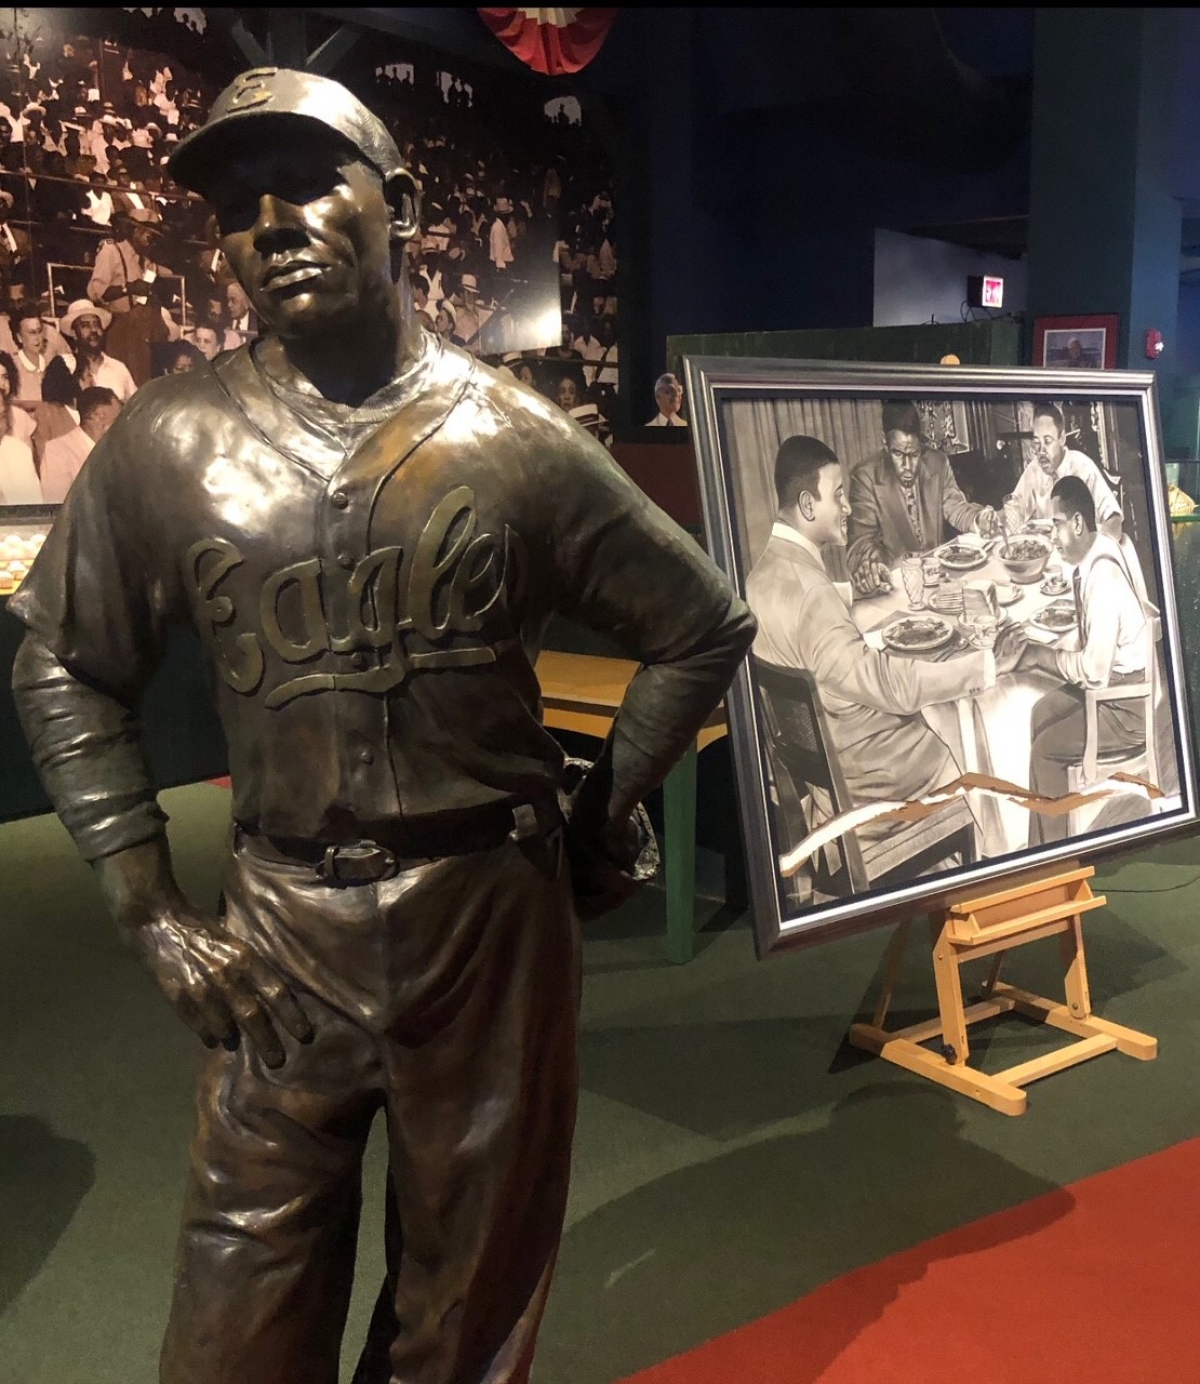 A statue on display at the Negro Leagues Baseball Museum in Kansas City.